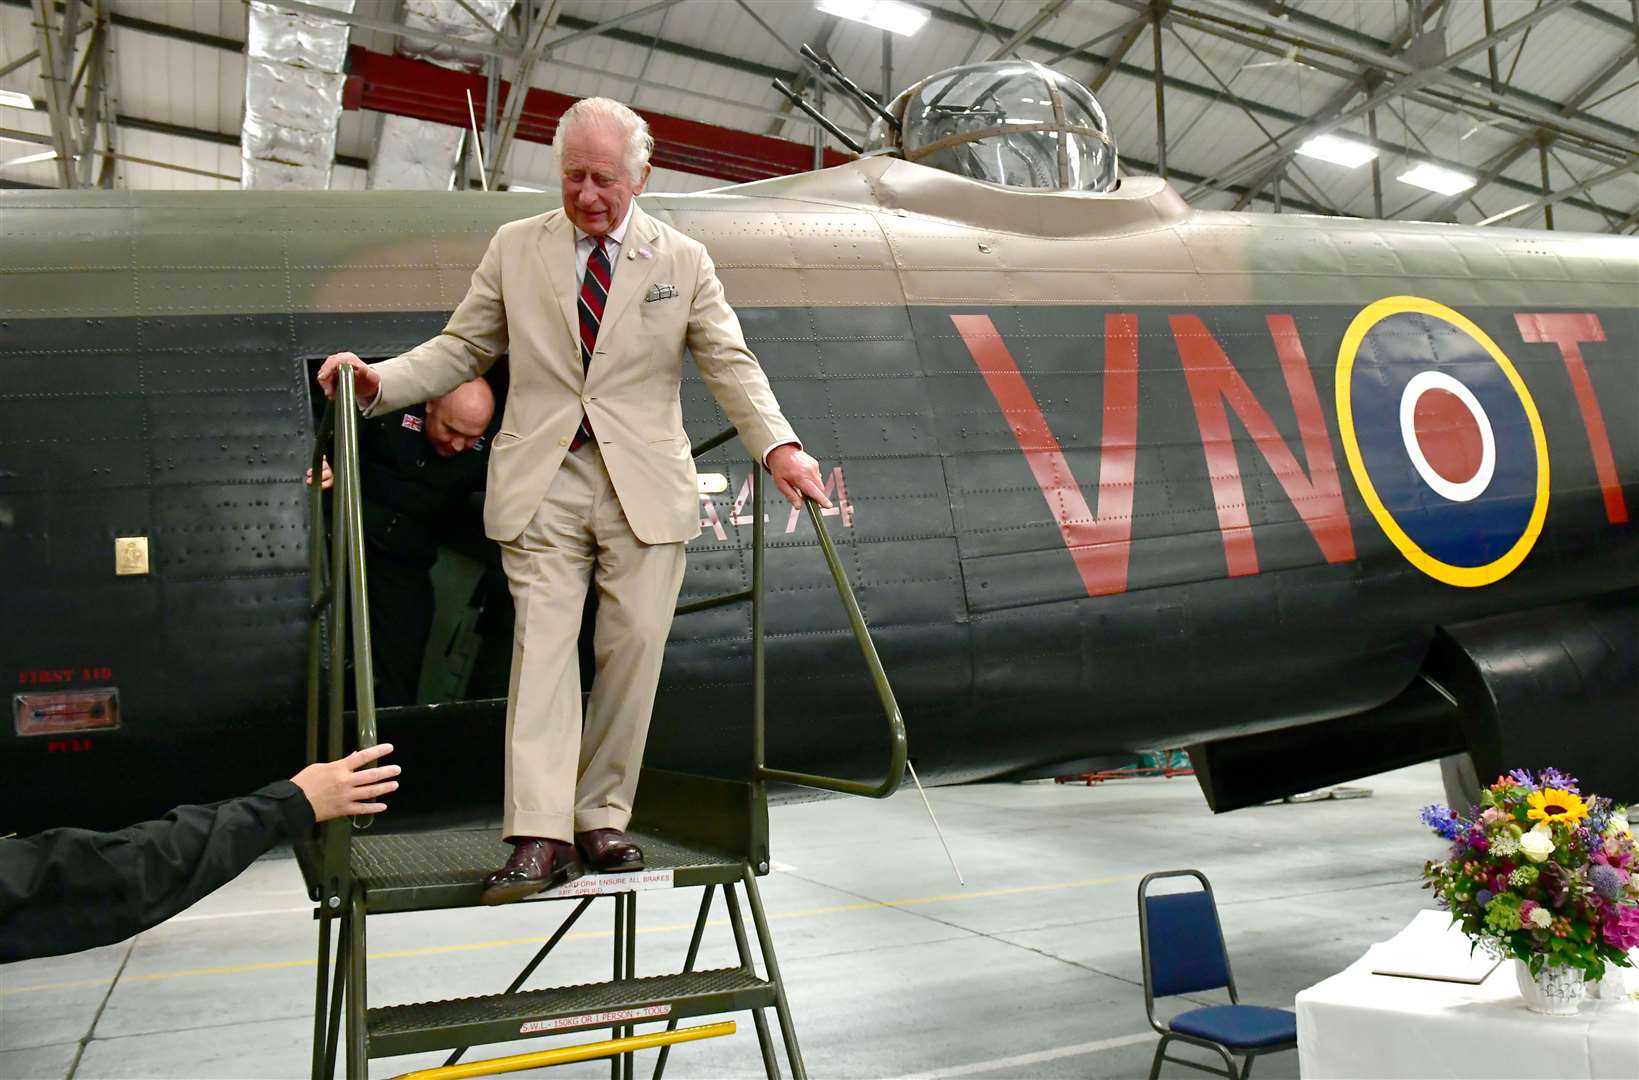 Charles inspects one of the aircraft during his visit to the Battle of Britain Memorial Flight in Lincolnshire (David Dawson/National World/PA)